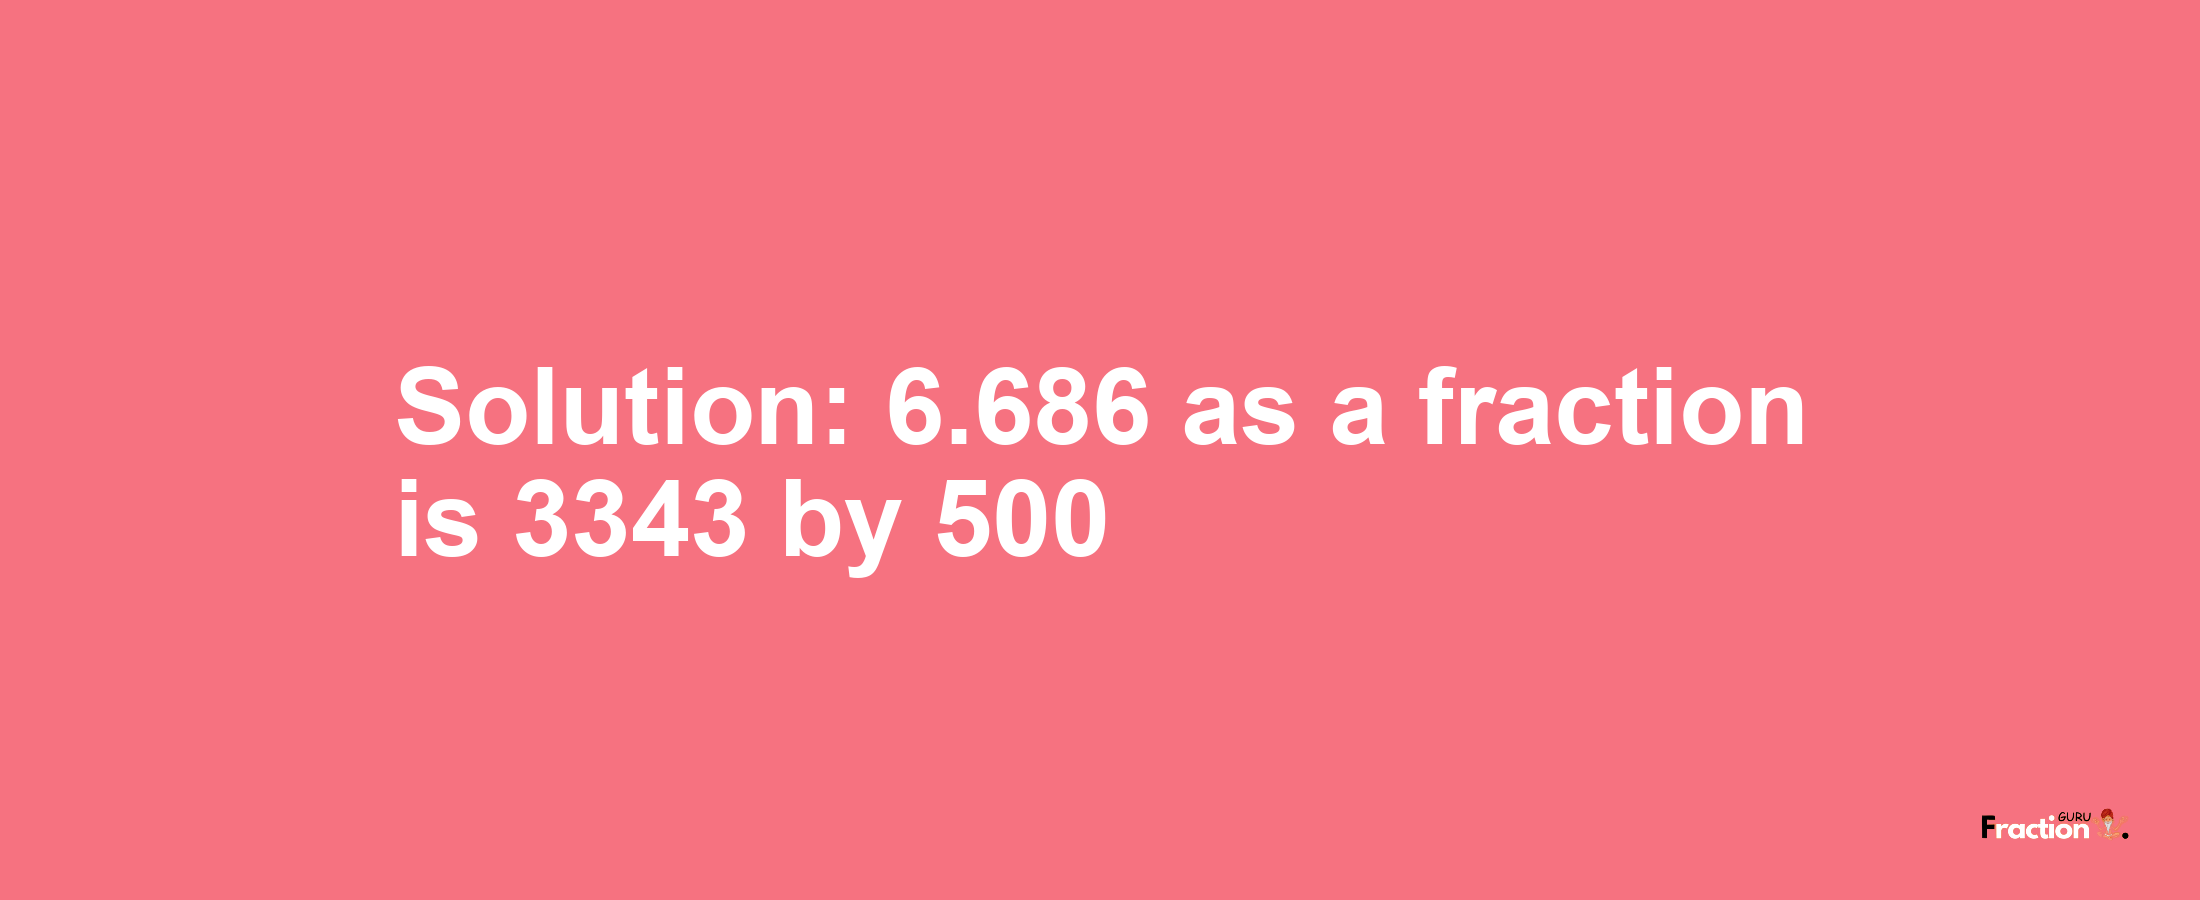 Solution:6.686 as a fraction is 3343/500